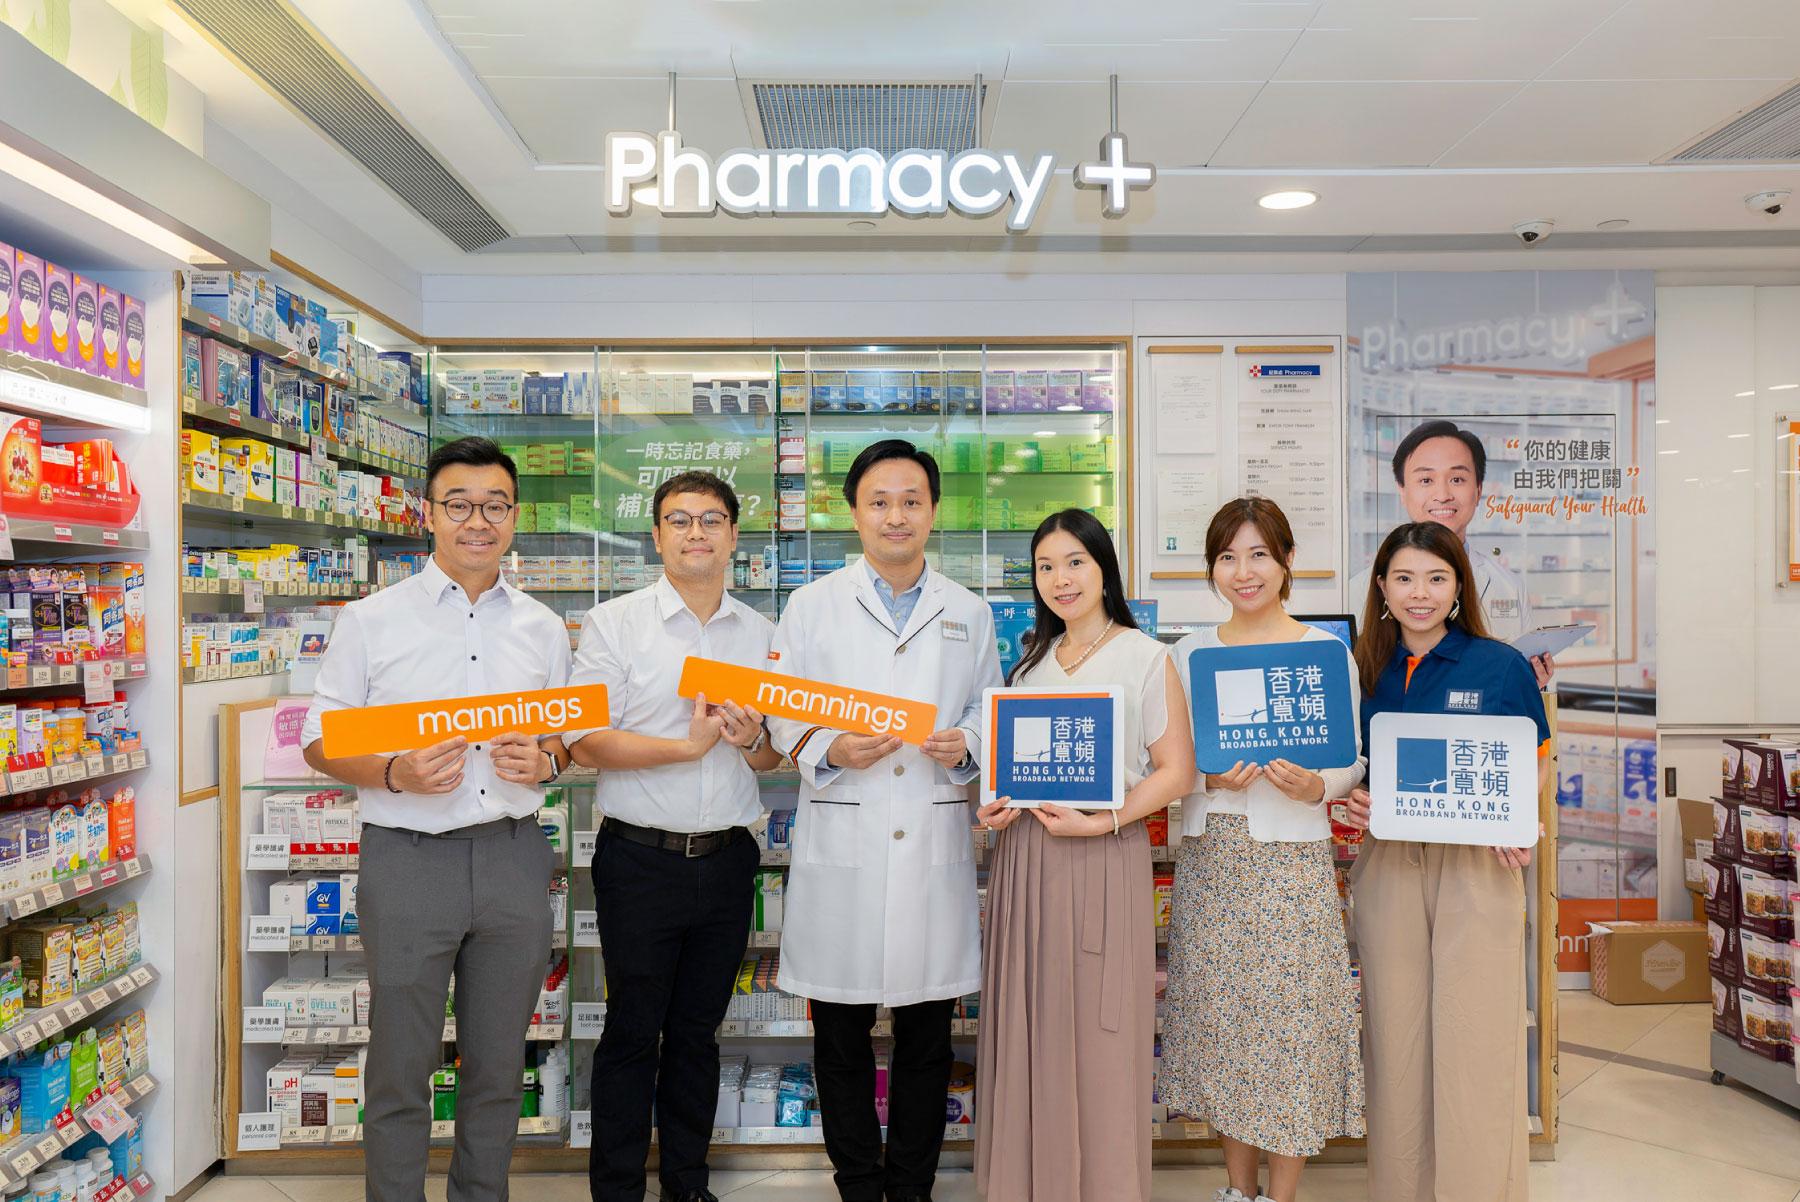 HKBN x Mannings Pioneer FREE Pharmacist Consultations for Our Talents